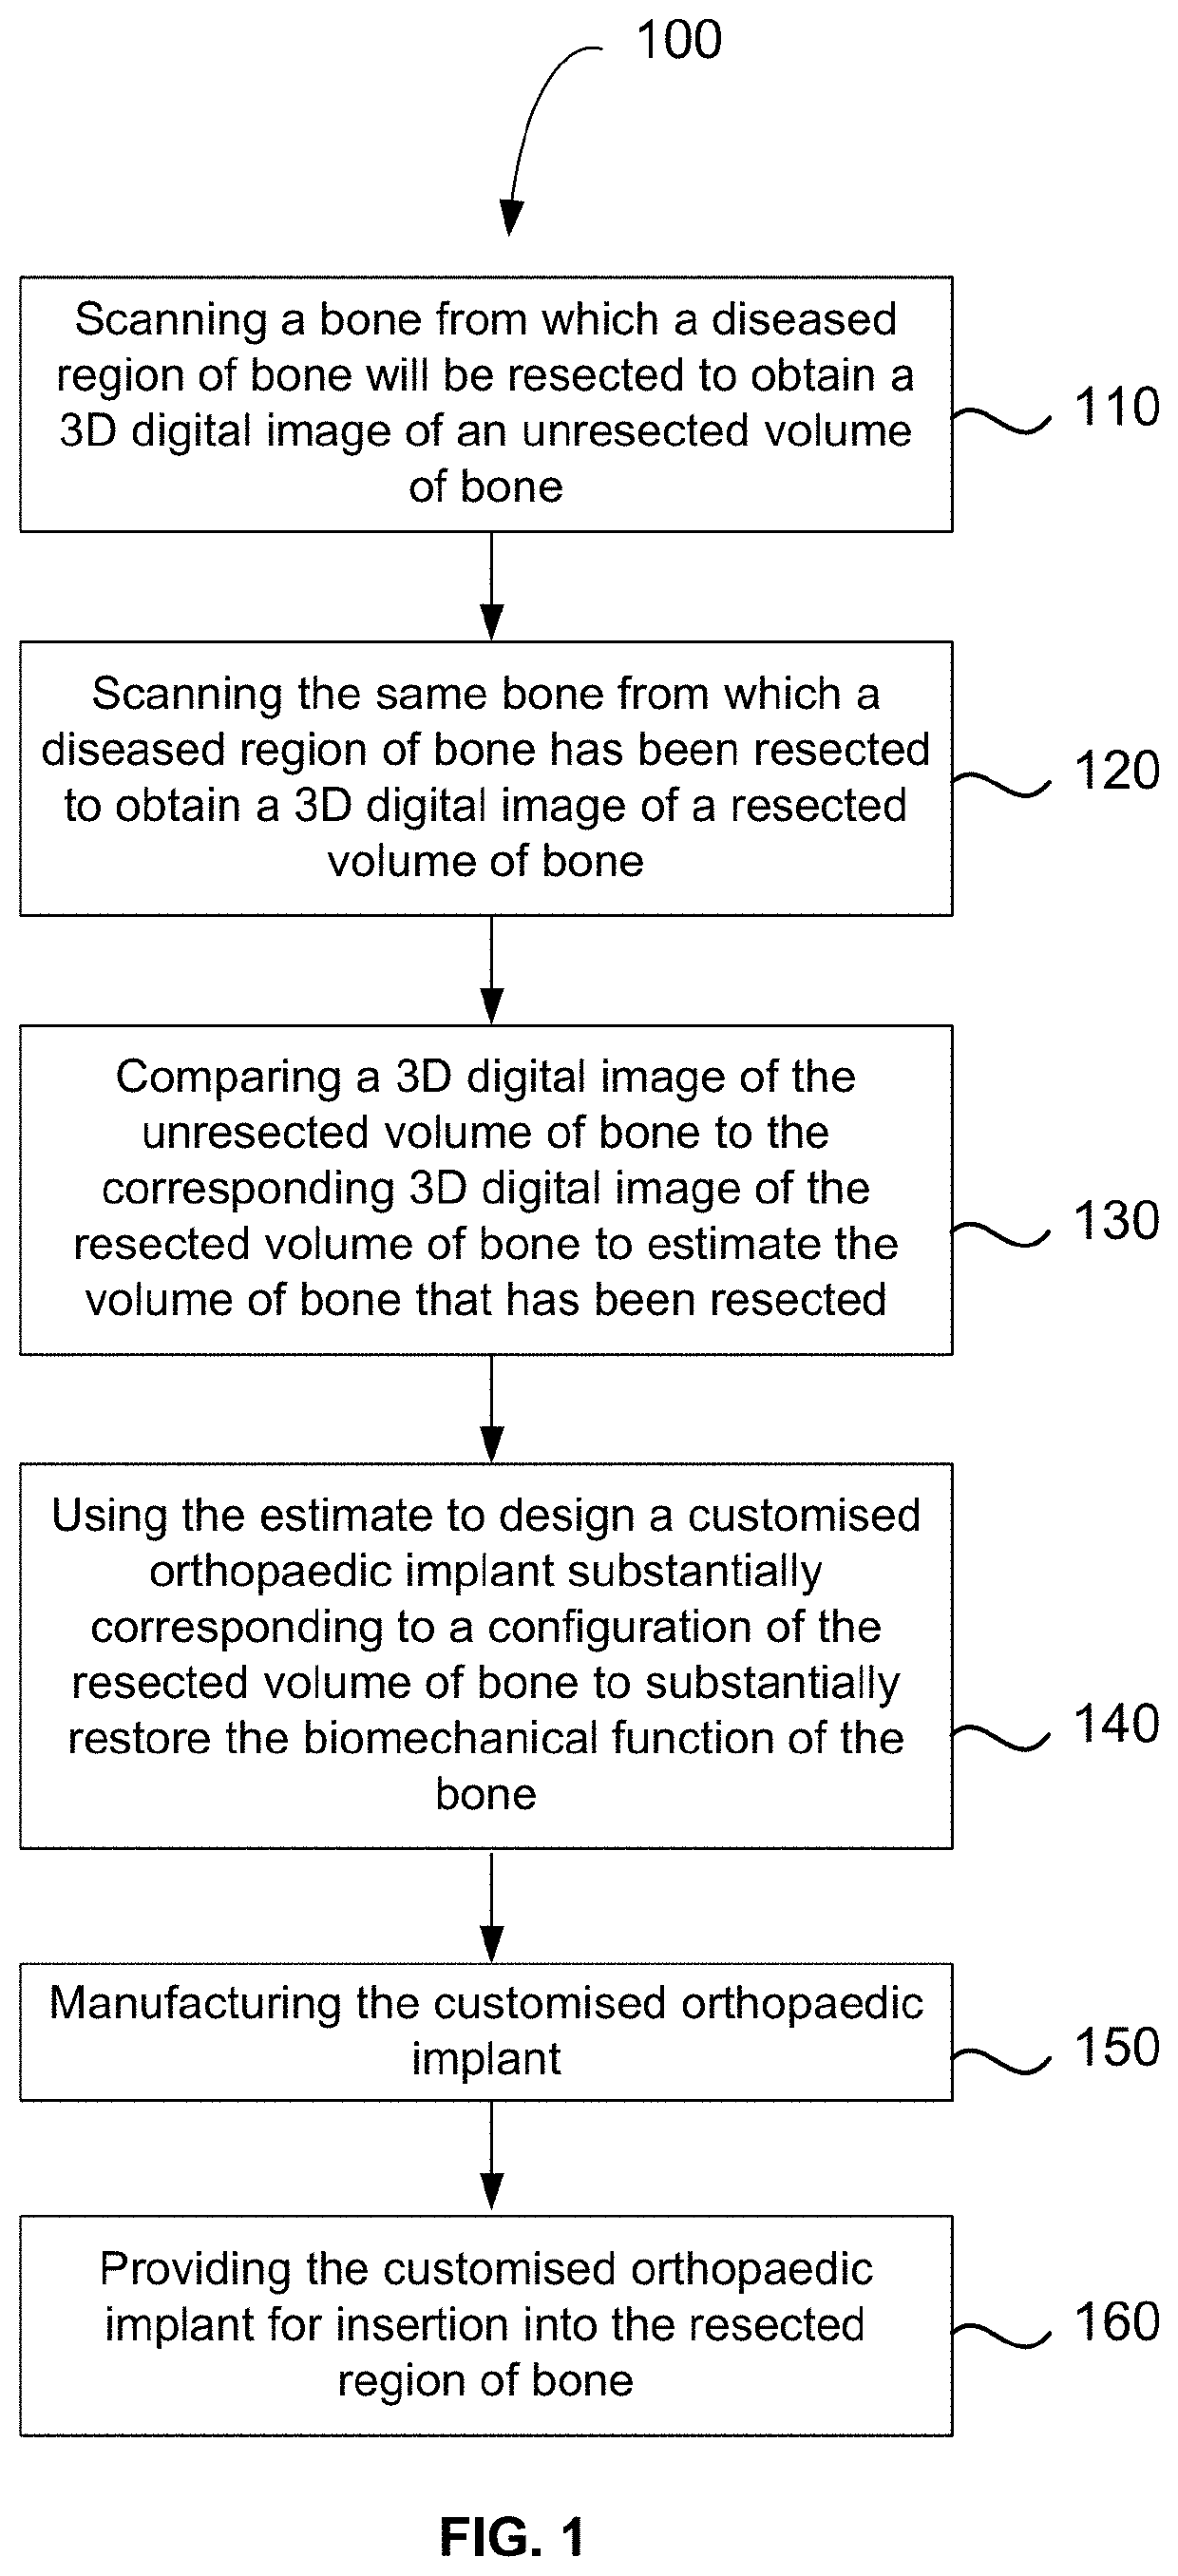 Method for producing a customised orthopaedic implant